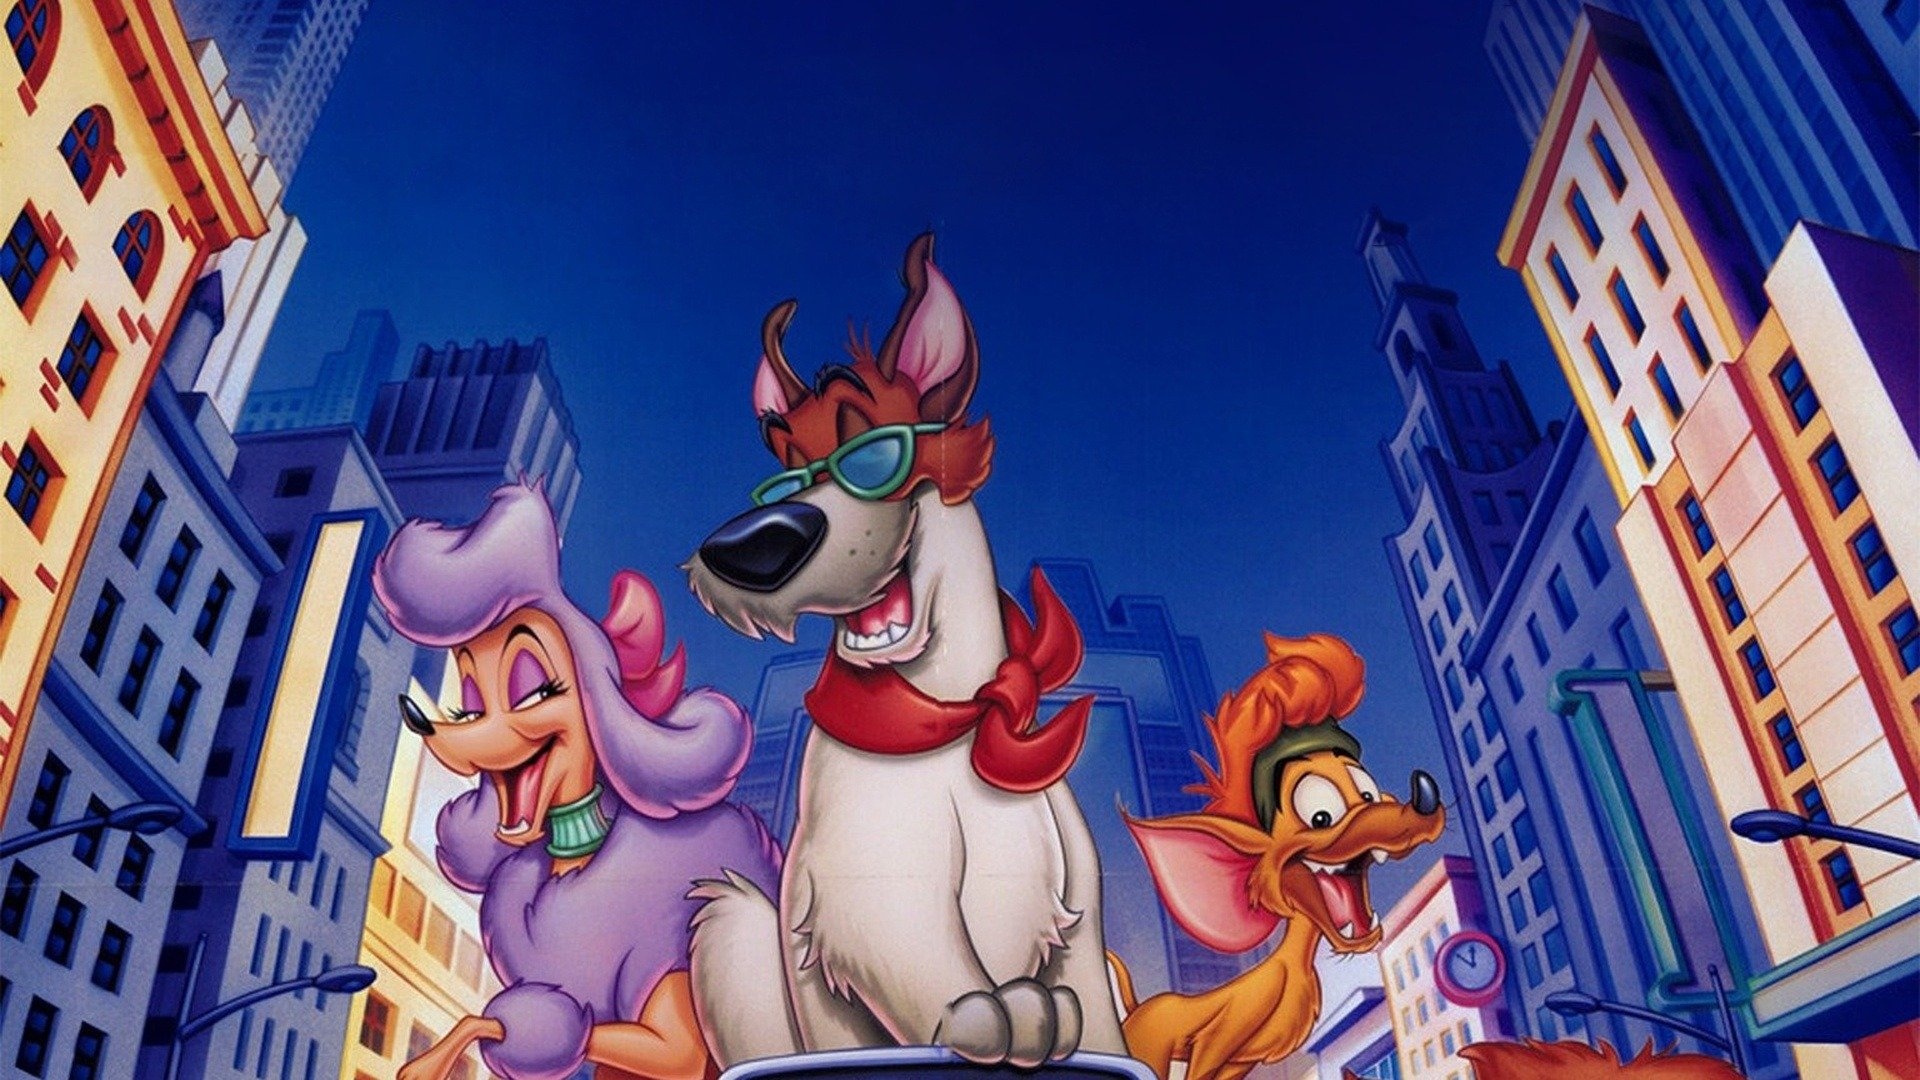 Oliver and Company, Full movie online, Captivating storyline, Memorable characters, 1920x1080 Full HD Desktop